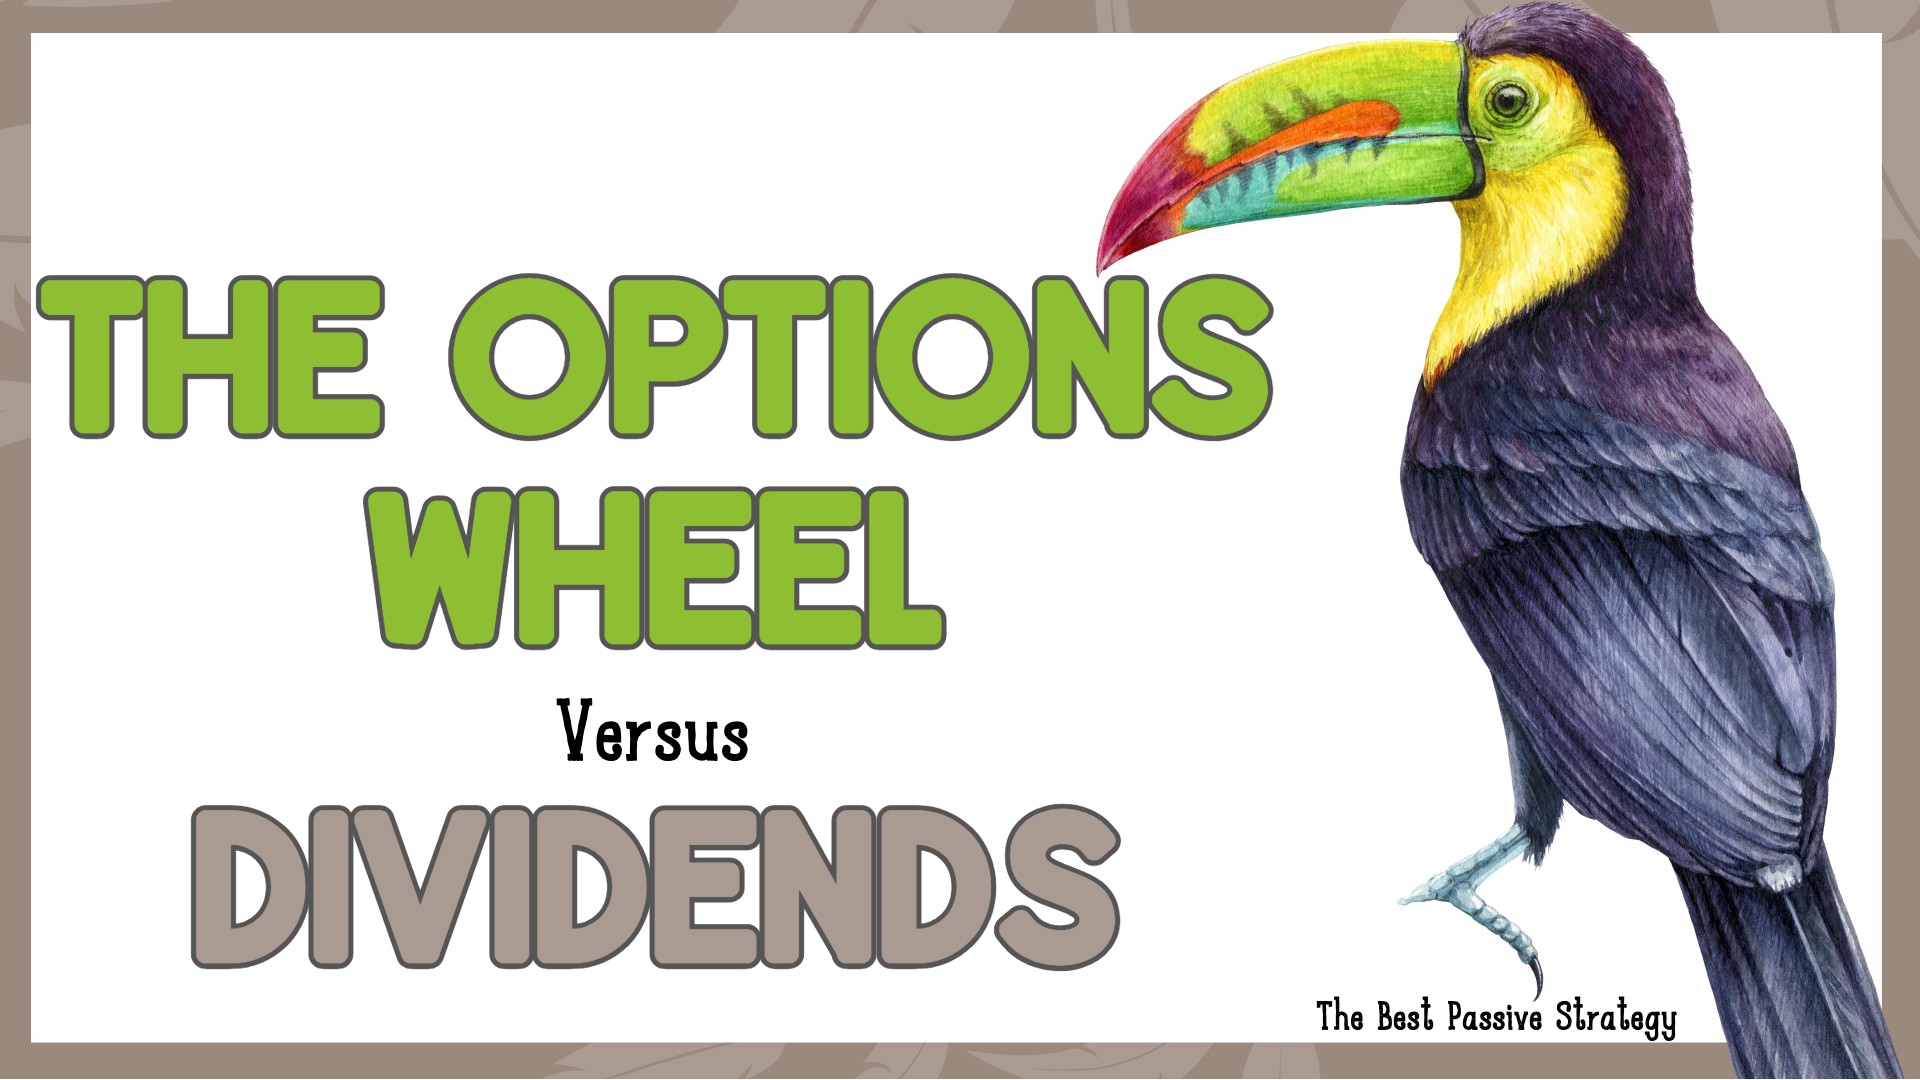 The Options Wheel vs. Dividends